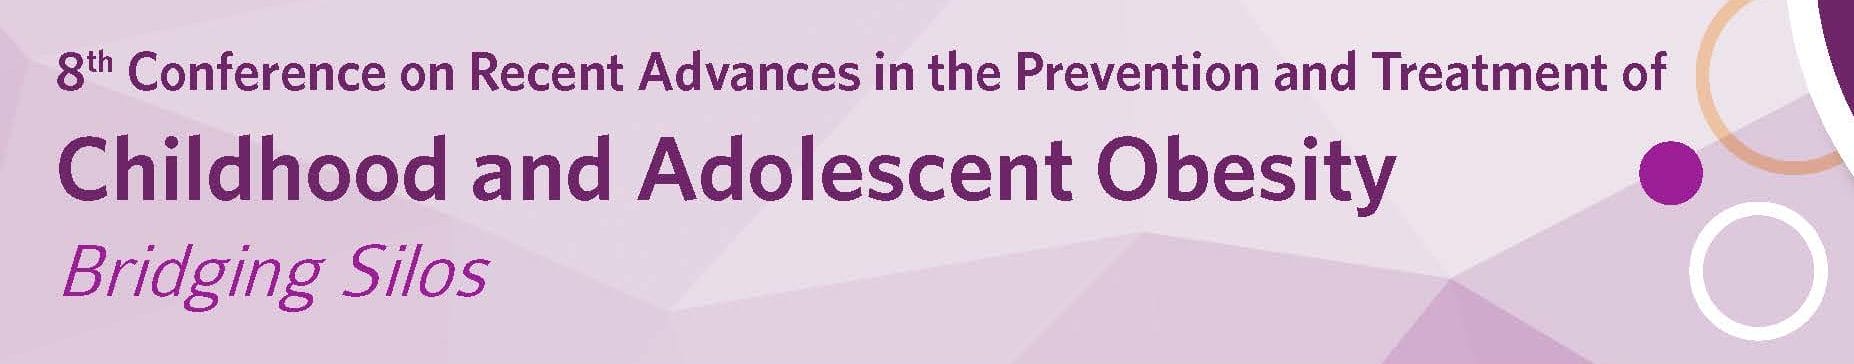 Banner for the 8th conference on recent advances in the prevention and treatment of childhood and adolescent obesity titled "bridging silos.